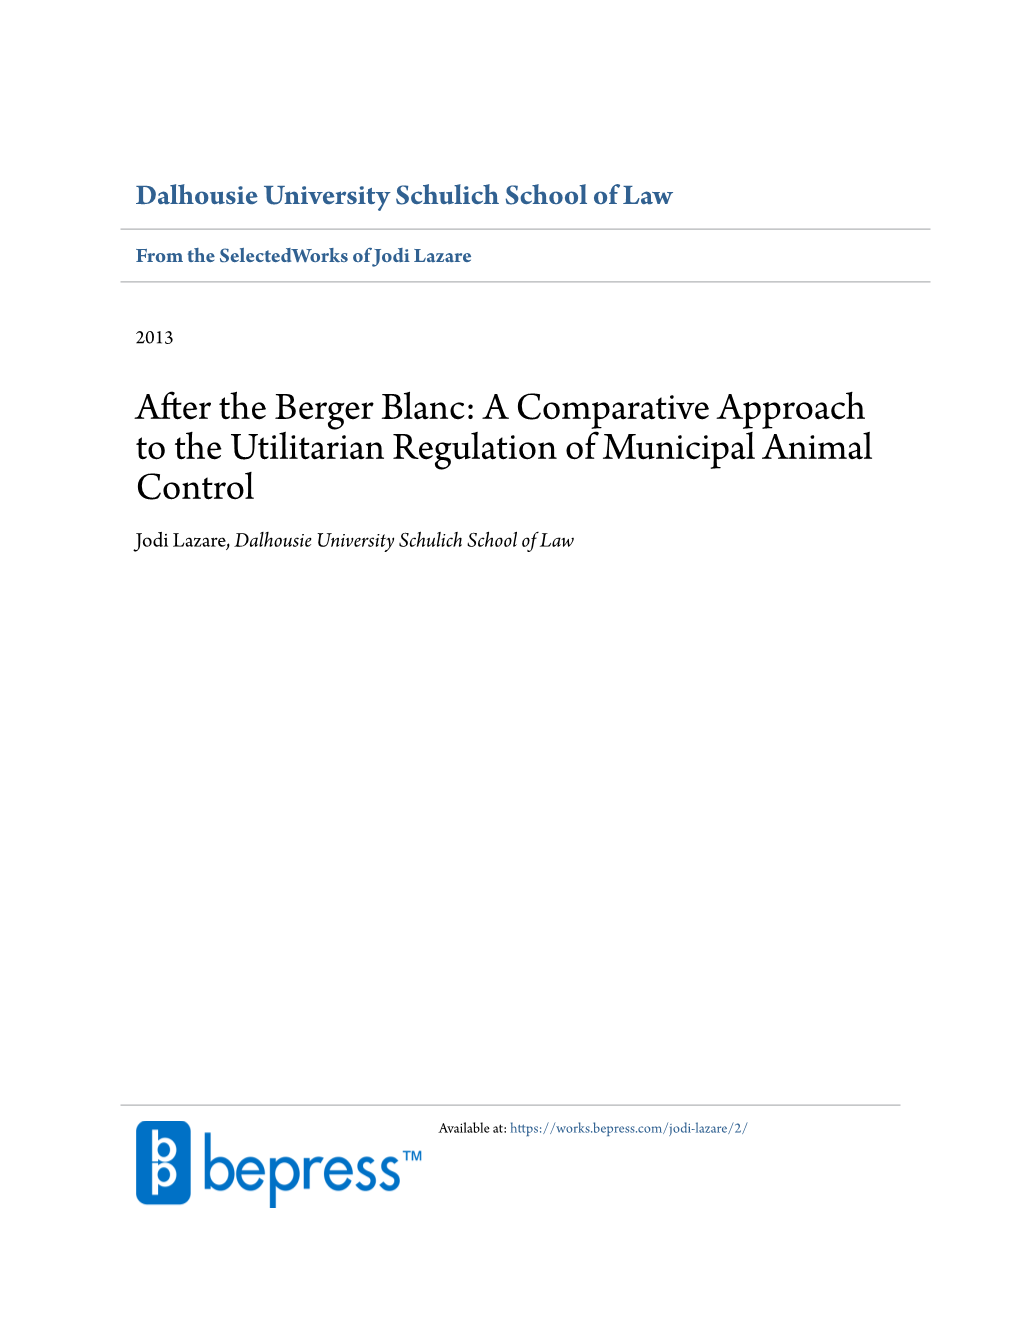 After the Berger Blanc: a Comparative Approach to the Utilitarian Regulation of Municipal Animal Control Jodi Lazare, Dalhousie University Schulich School of Law